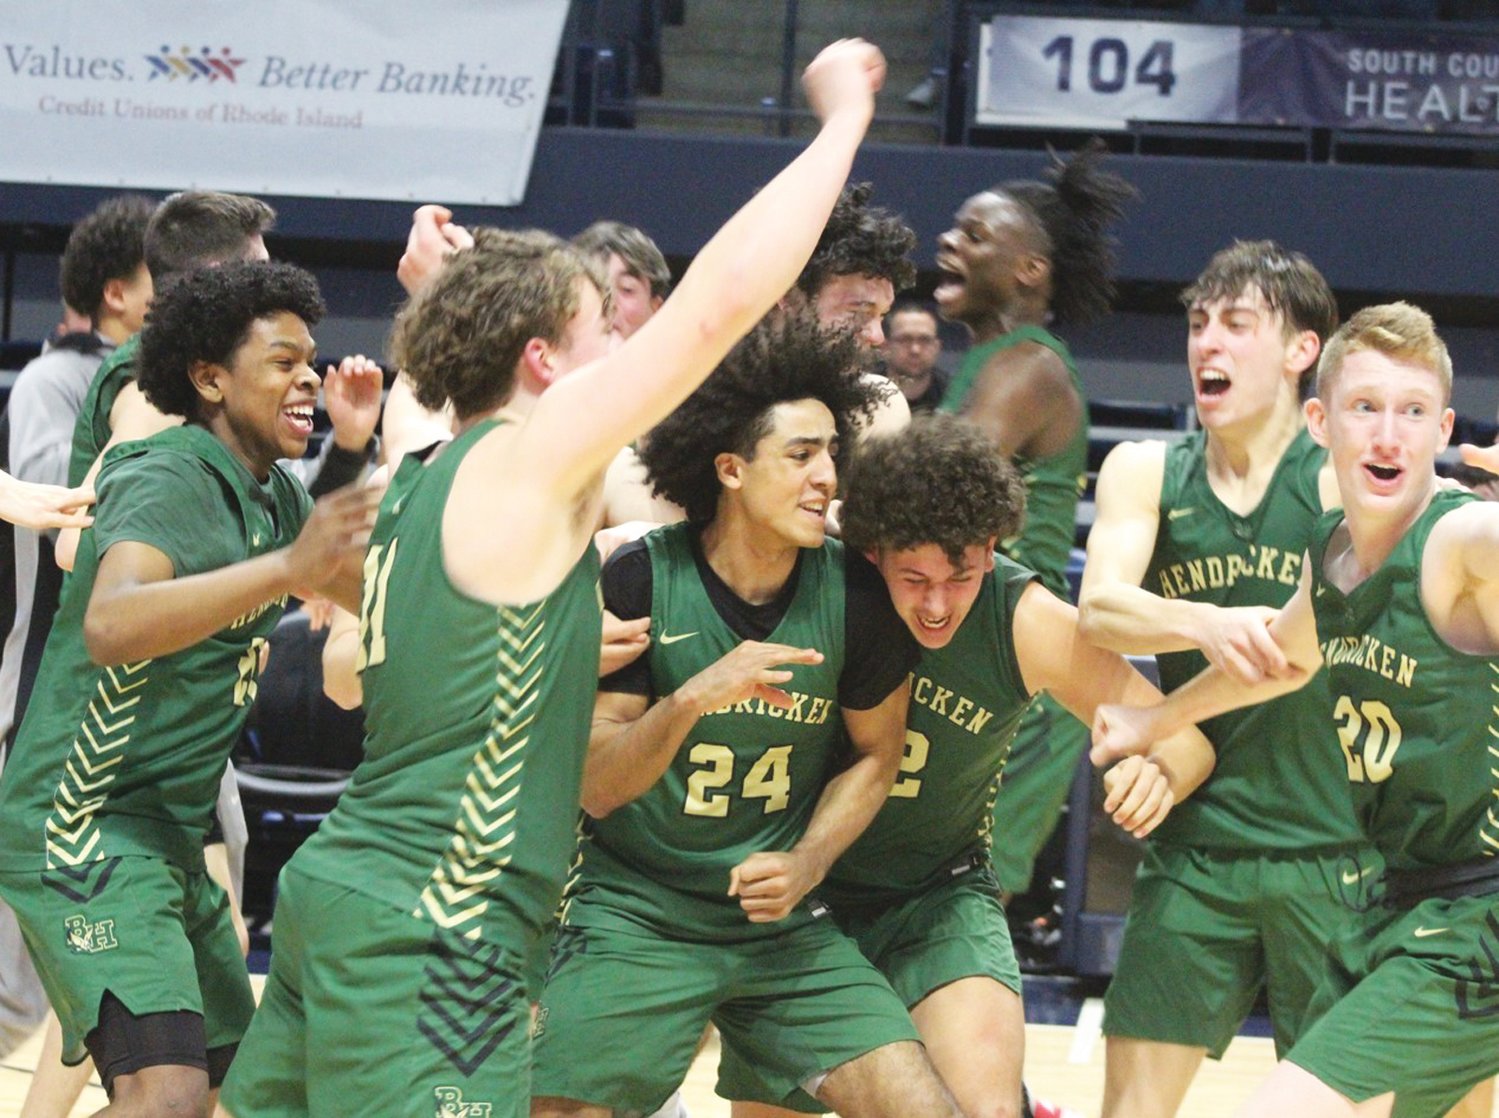 CHAMPS AGAIN: The Bishop Hendricken basketball team celebrates after winning the state title on Sunday. (Photos by Alex Sponseller)